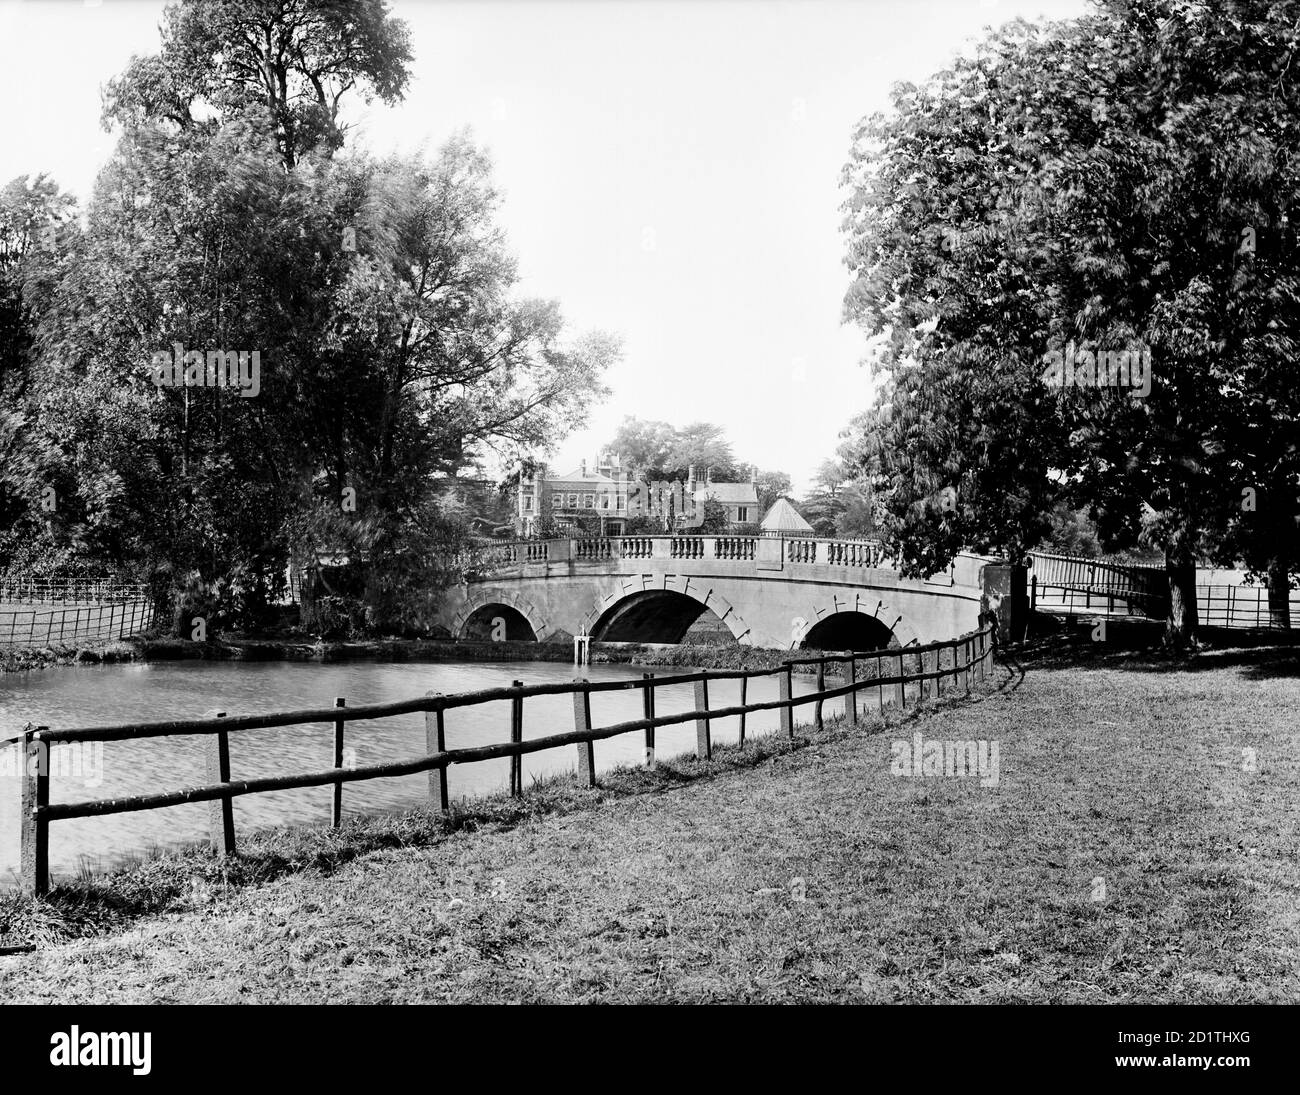 WHITEKNIGHTS PARK, Reading, Berkshire. A landscape view in the park showing the ornamental bridge over the lake. The house can be seen in the background. Photographed in 1890 by Henry Taunt. Stock Photo